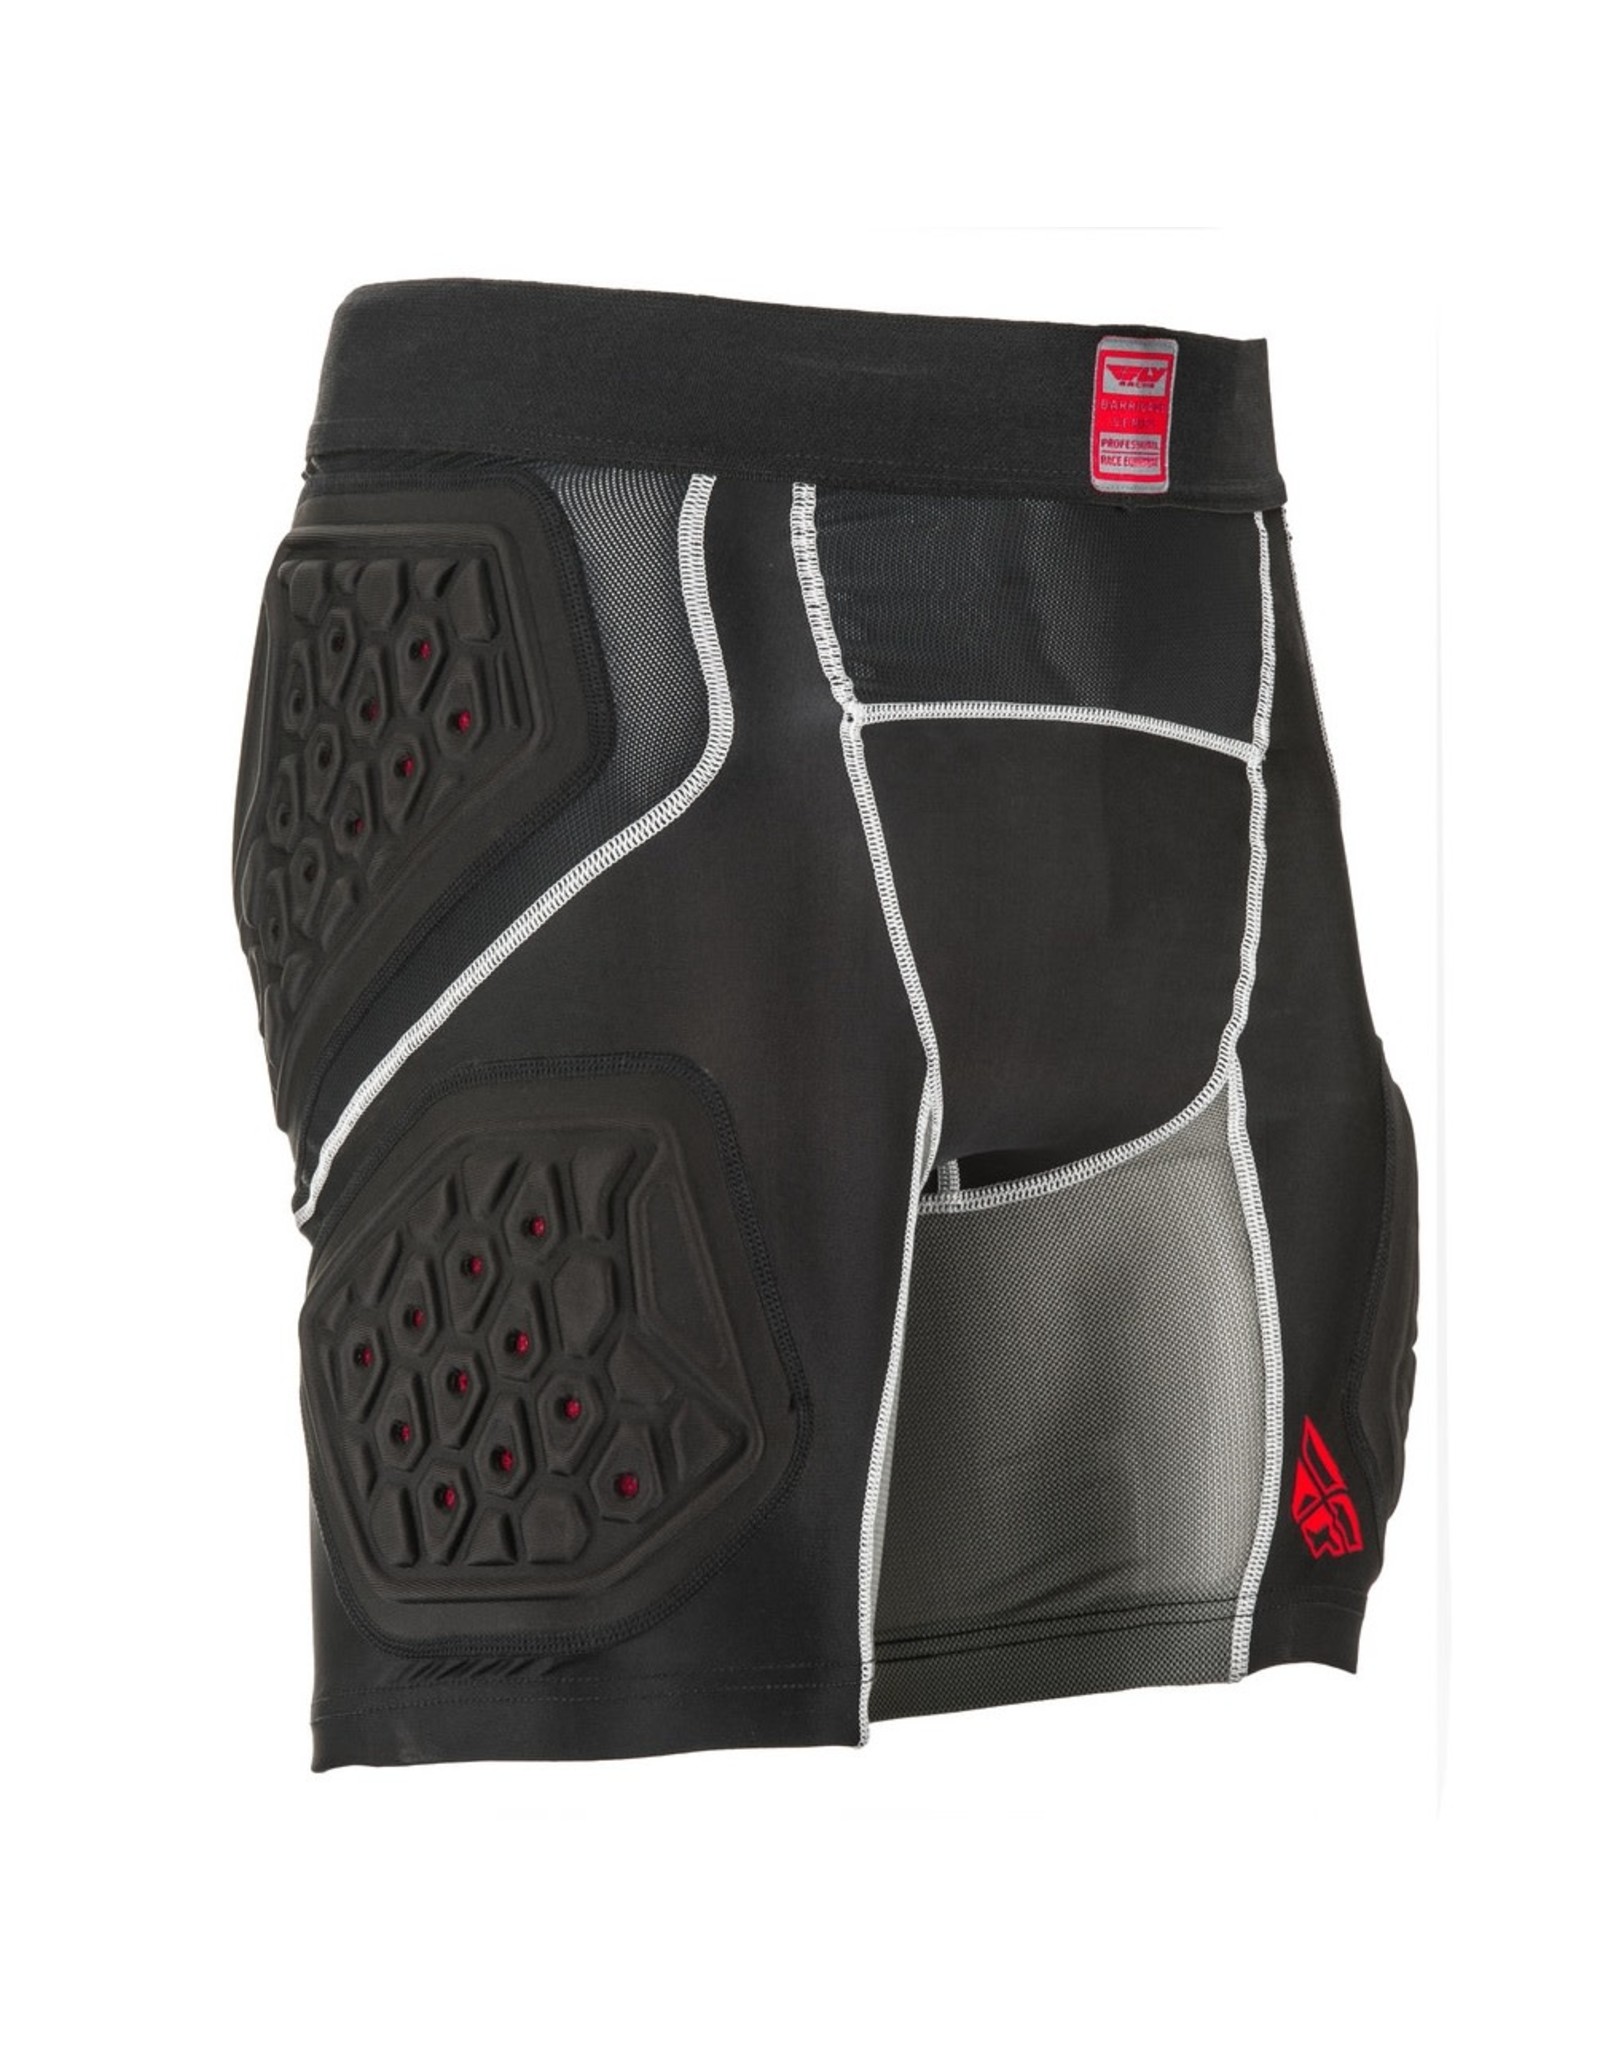 FLY RACING Fly Racing Barricade Compression Shorts